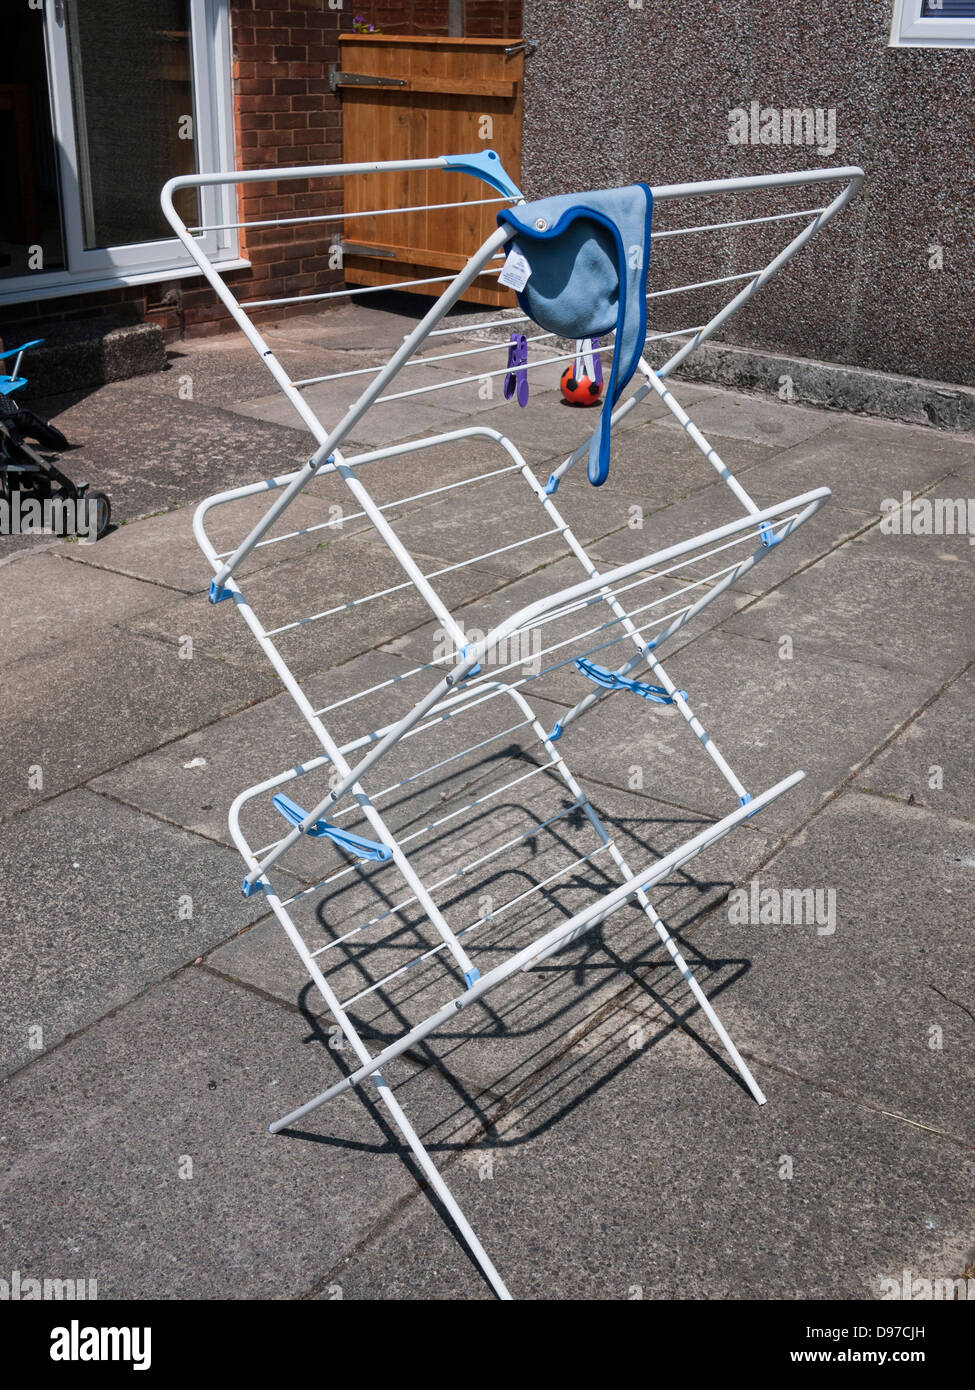 Clothes - Horse frame for airing washing, UK. Stock Photo